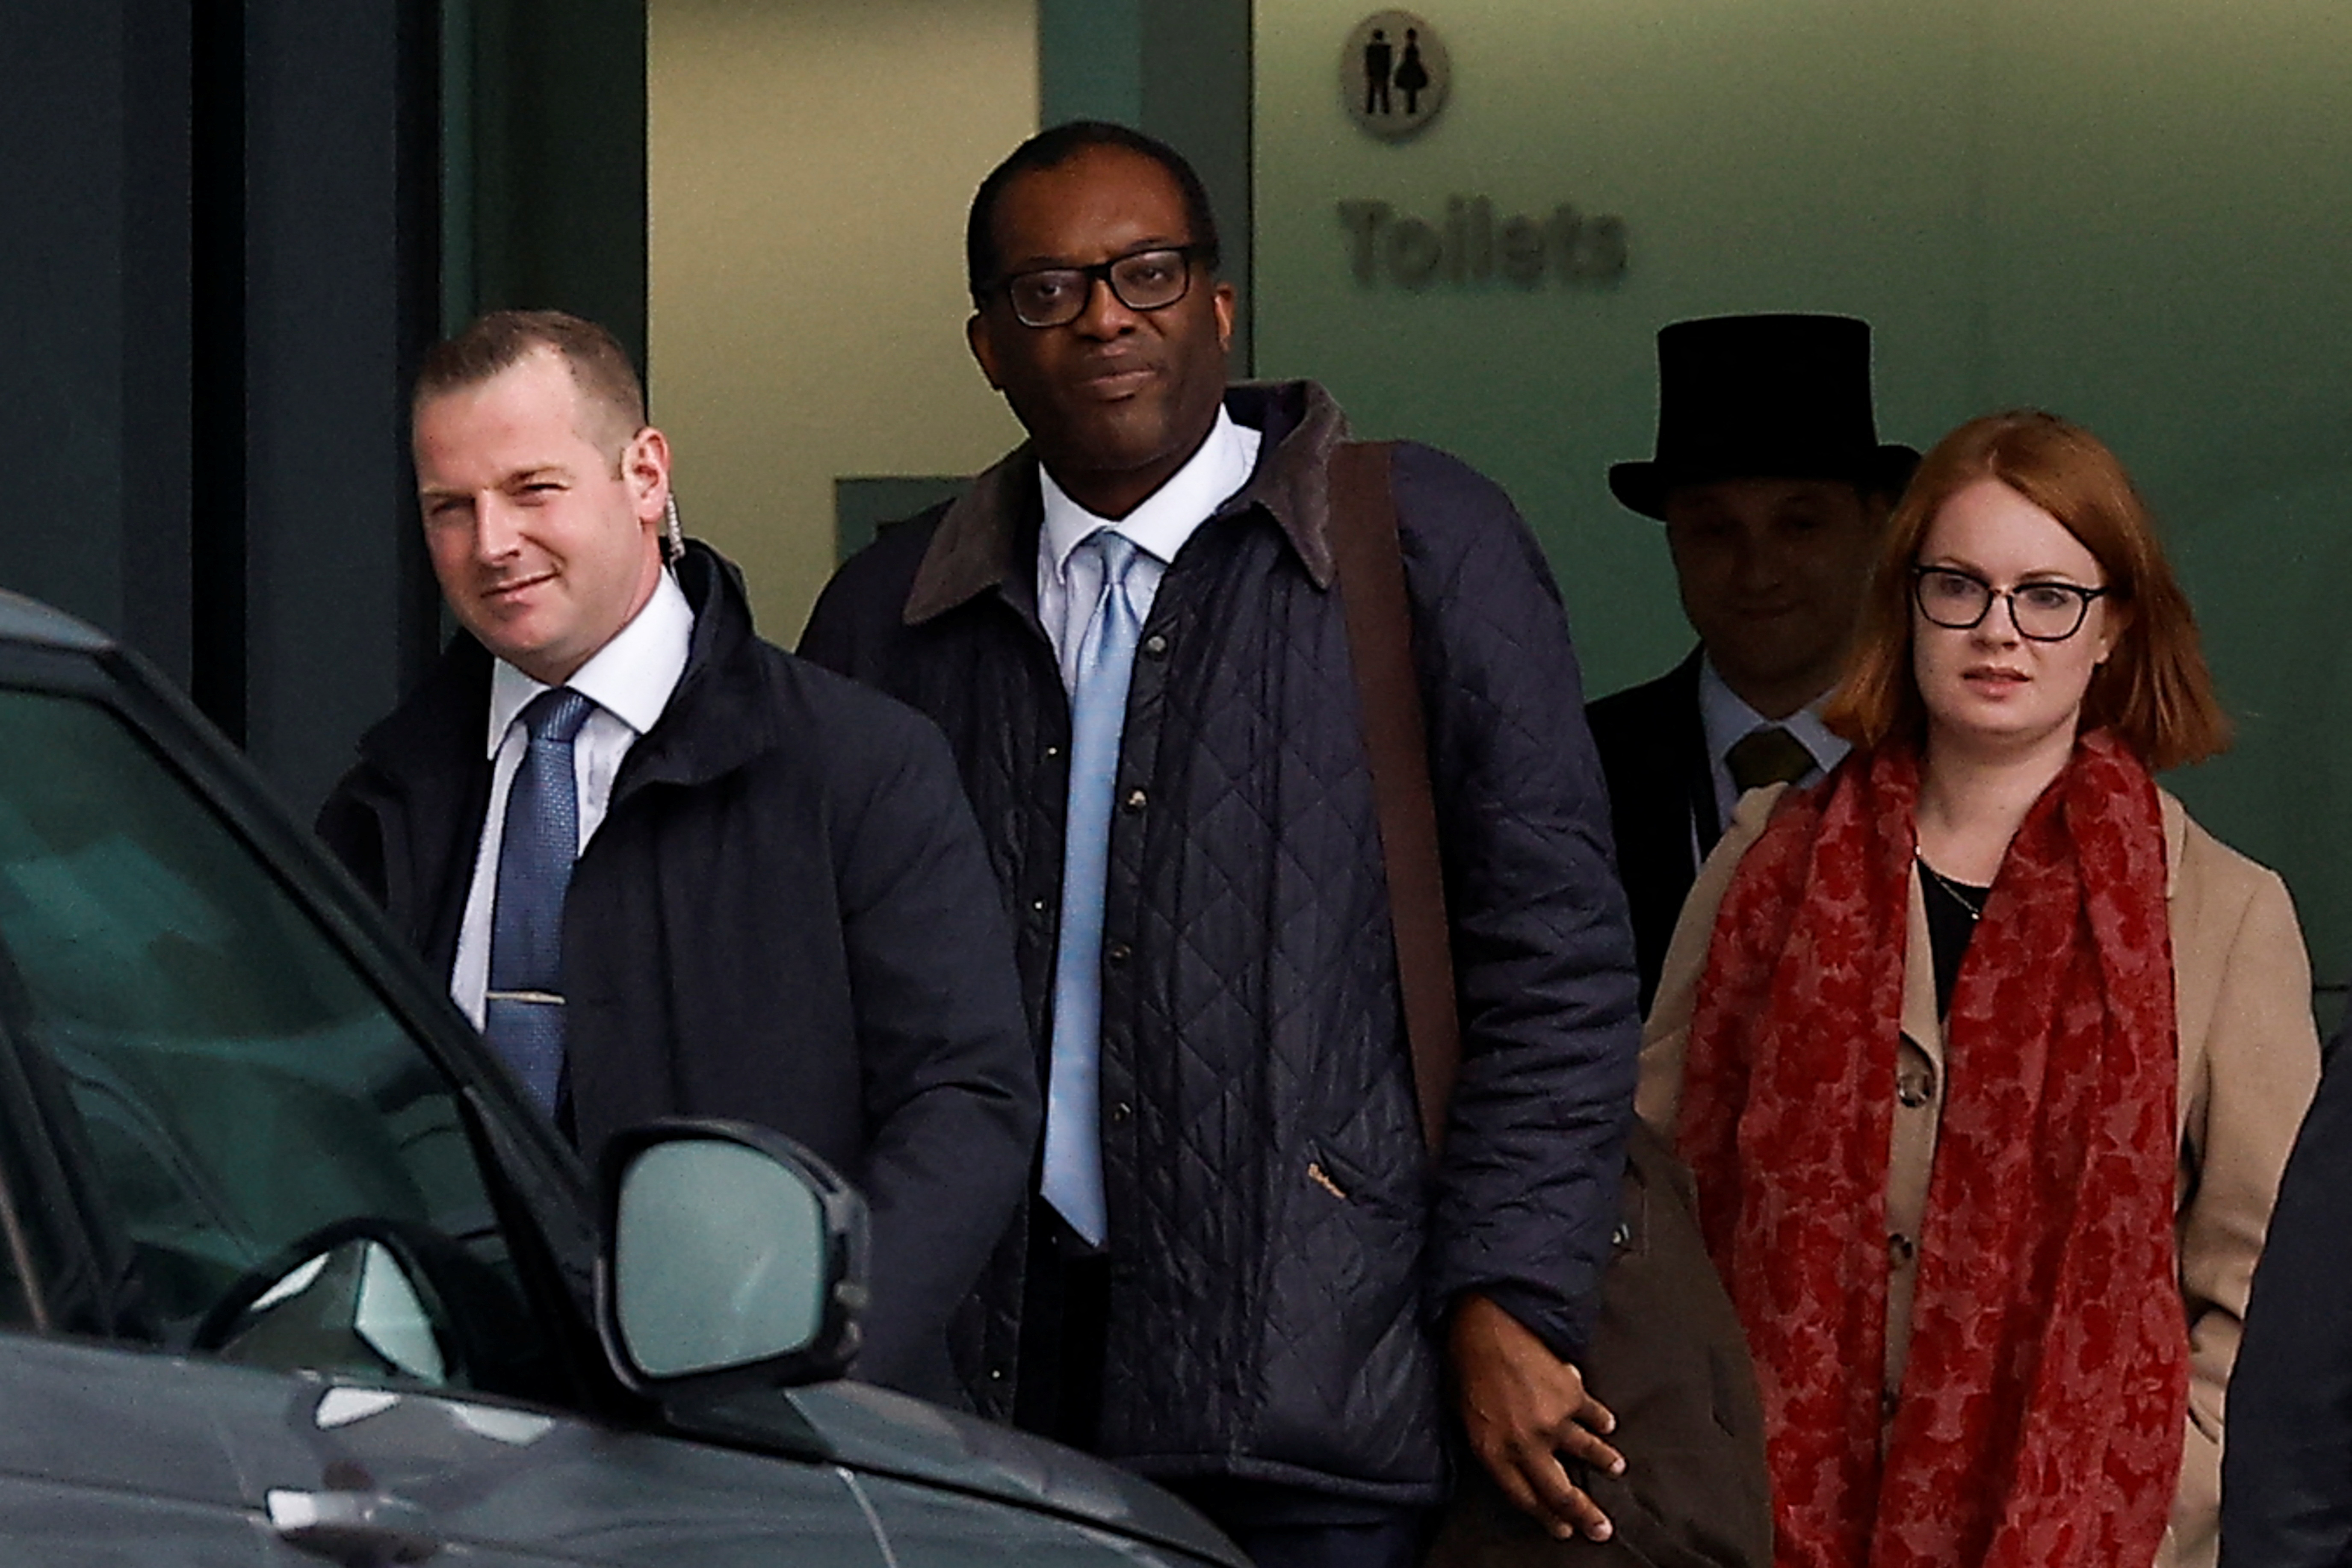 Chancellor of the Exchequer Kwasi Kwarteng leaves Heathrow Airport